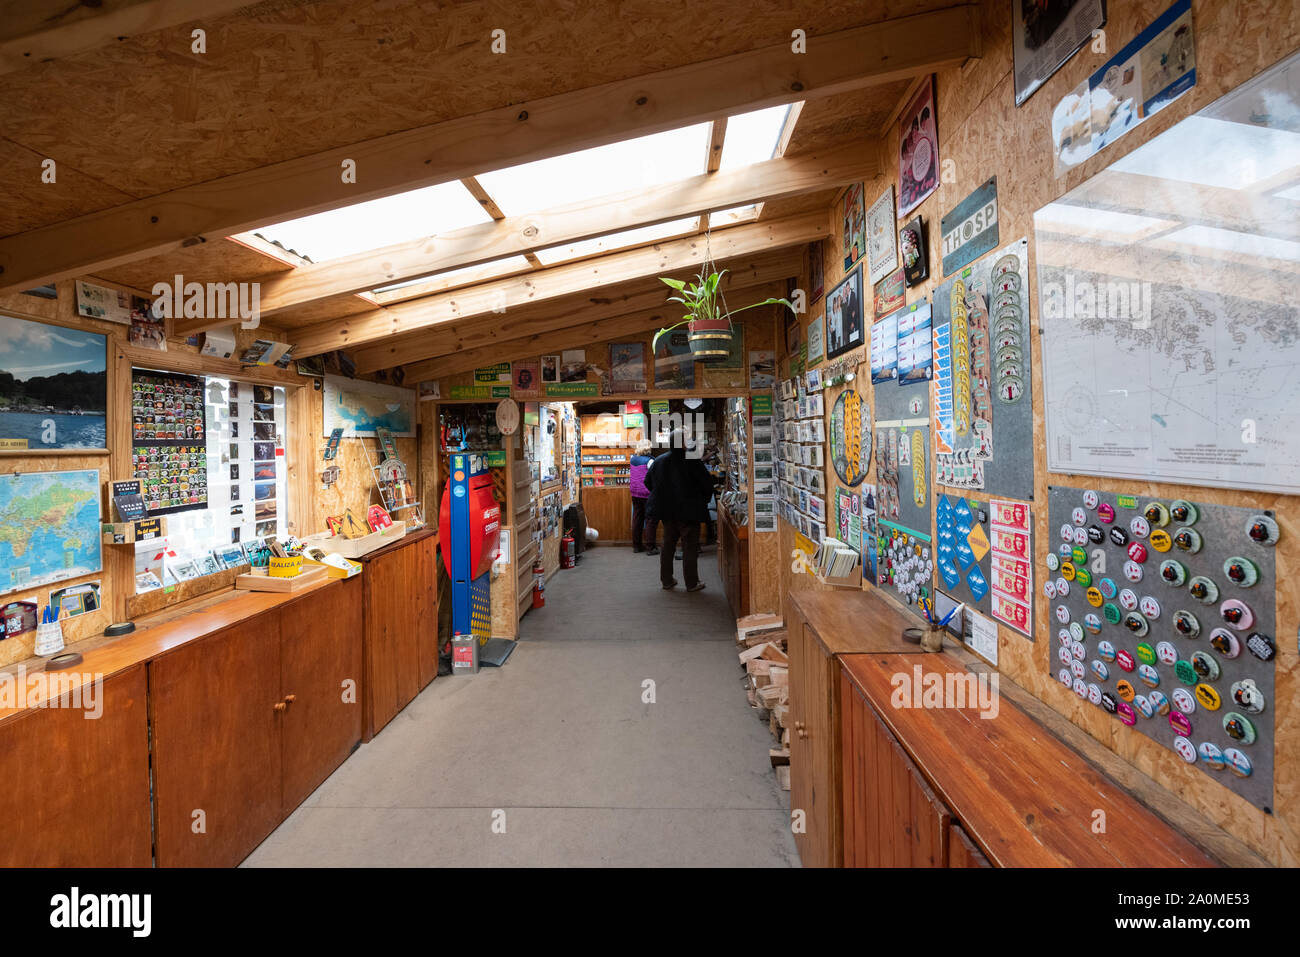 Ushuaia, Argentina - March 28 2019: Inside the post office located at the end of the world where tourists come to send letters and stamp passports. Stock Photo